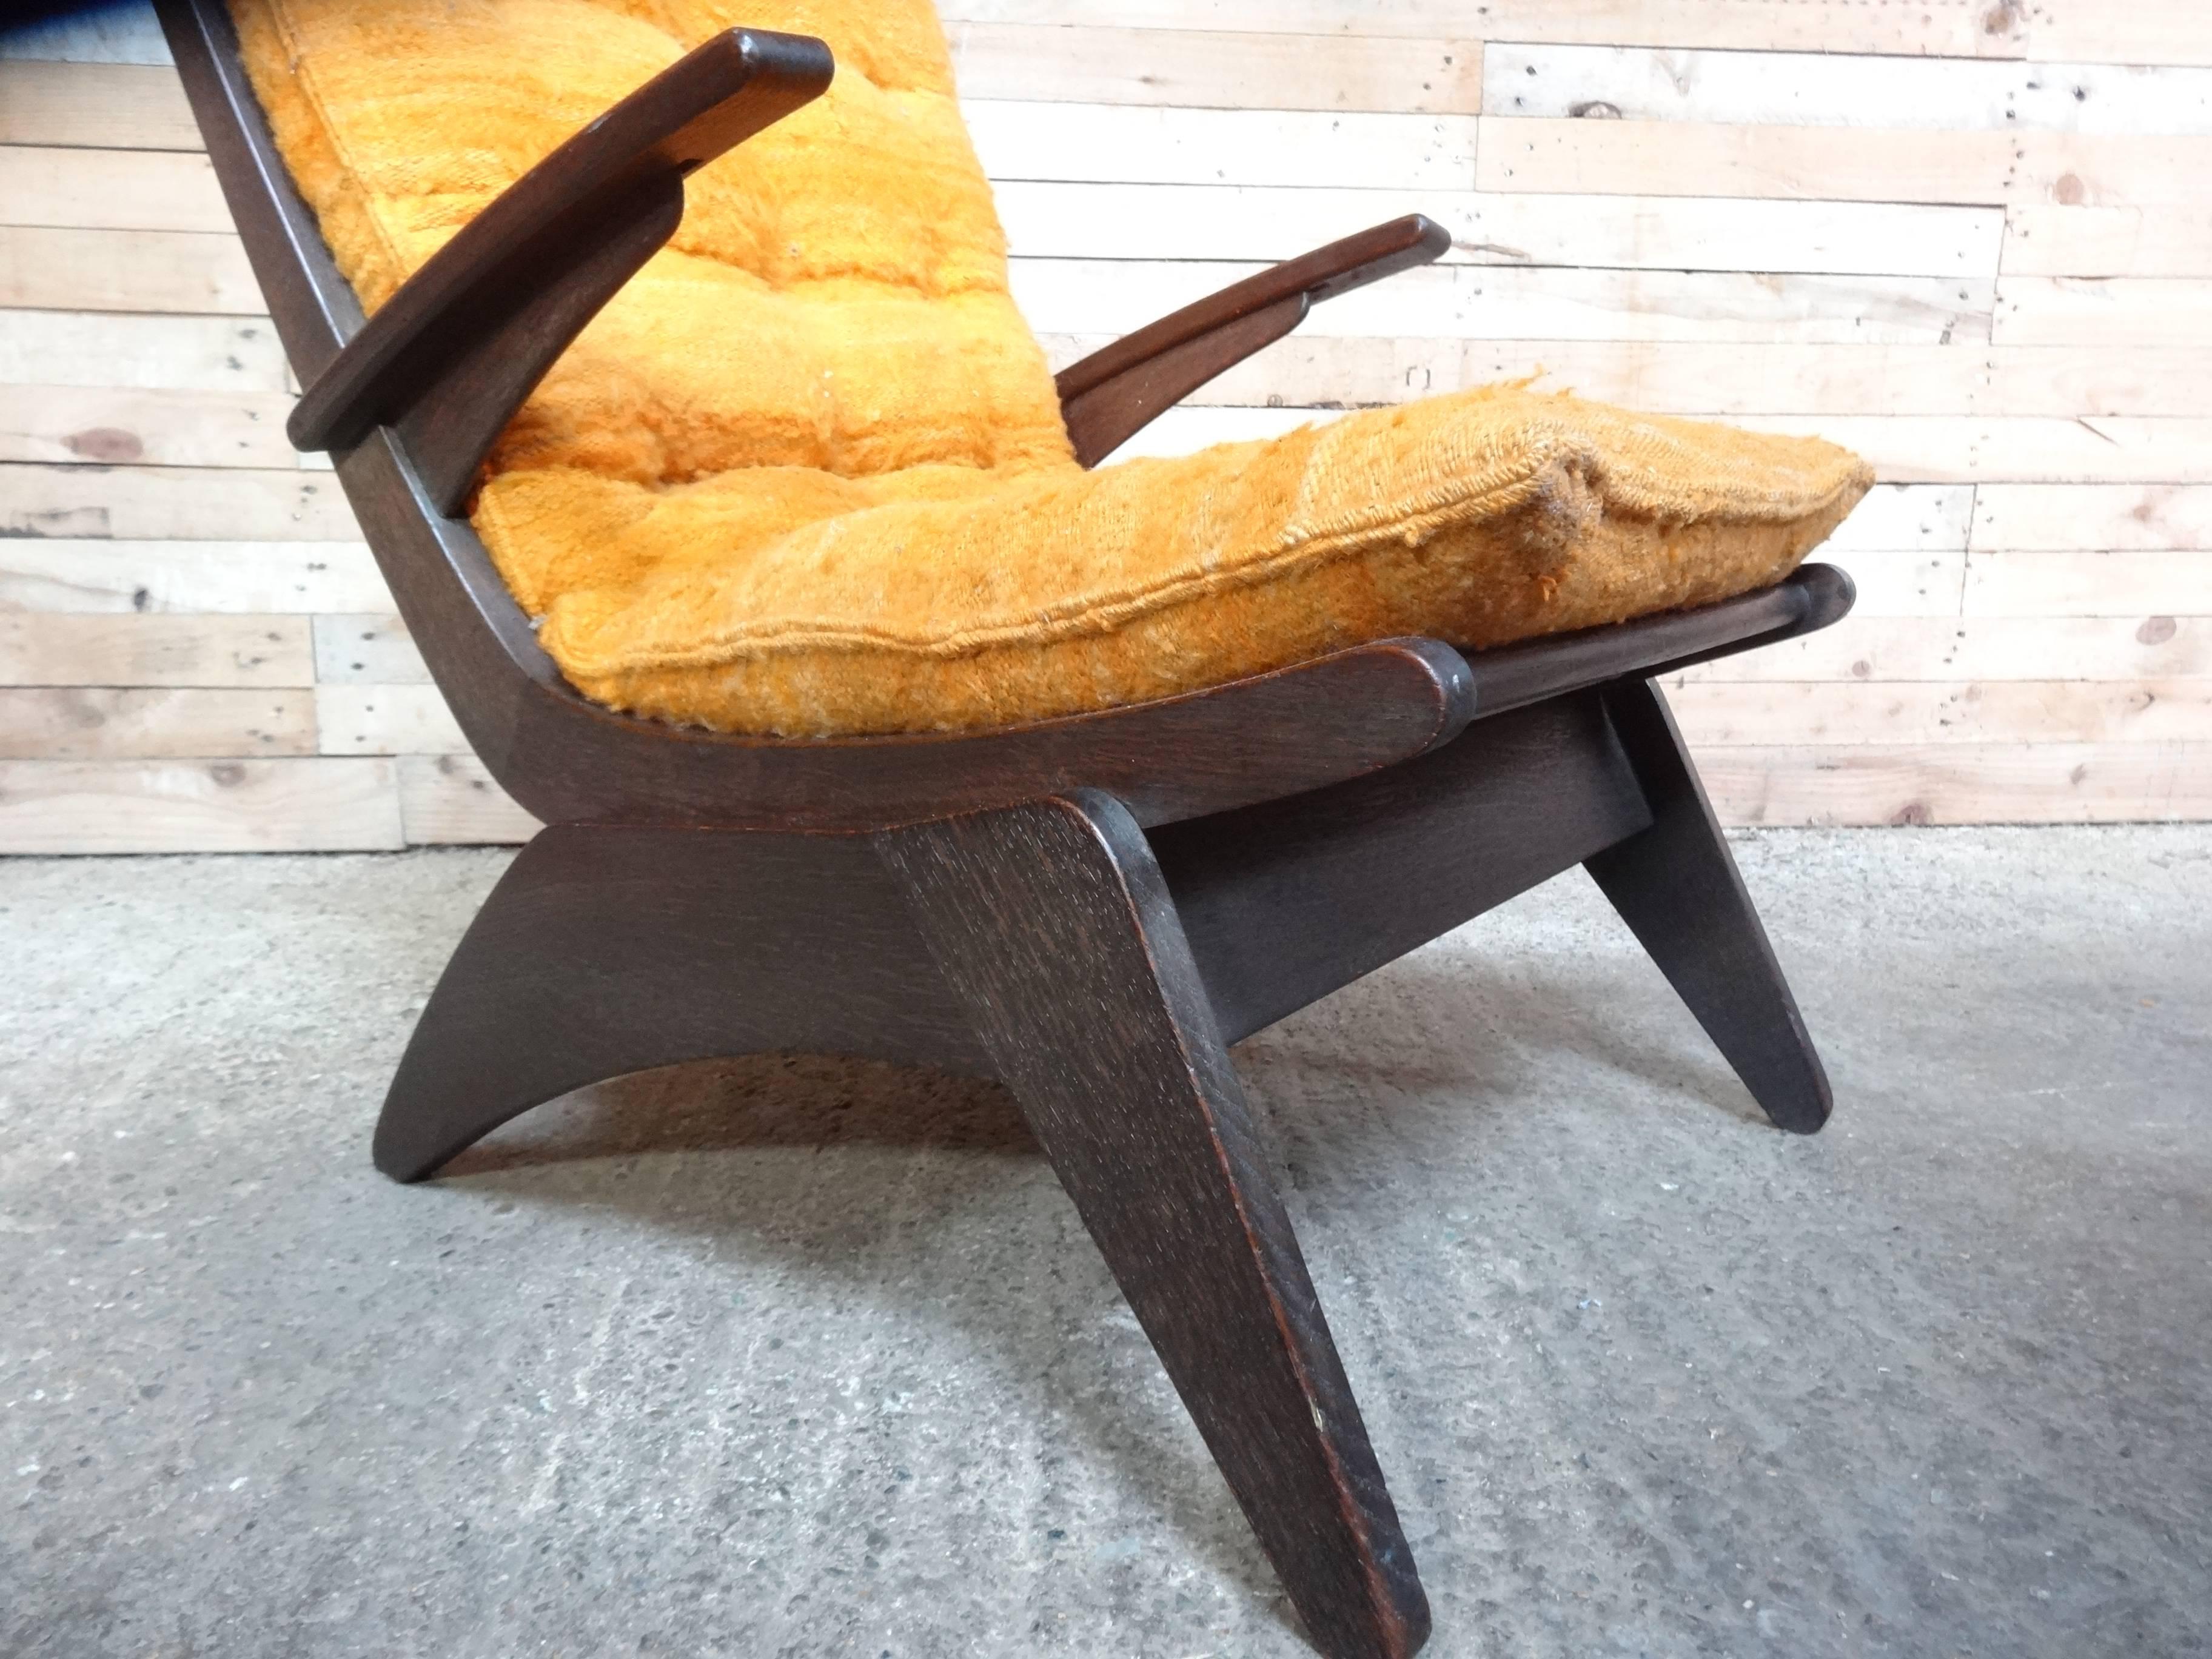 A super rare Wim van Gelderen for Spectrum 1950s lounge chair, we have two of these chairs available! your possibility to buy a designer iconic chair. The seat cover can do with reupholstering, current cover is totally original for the 1950s.